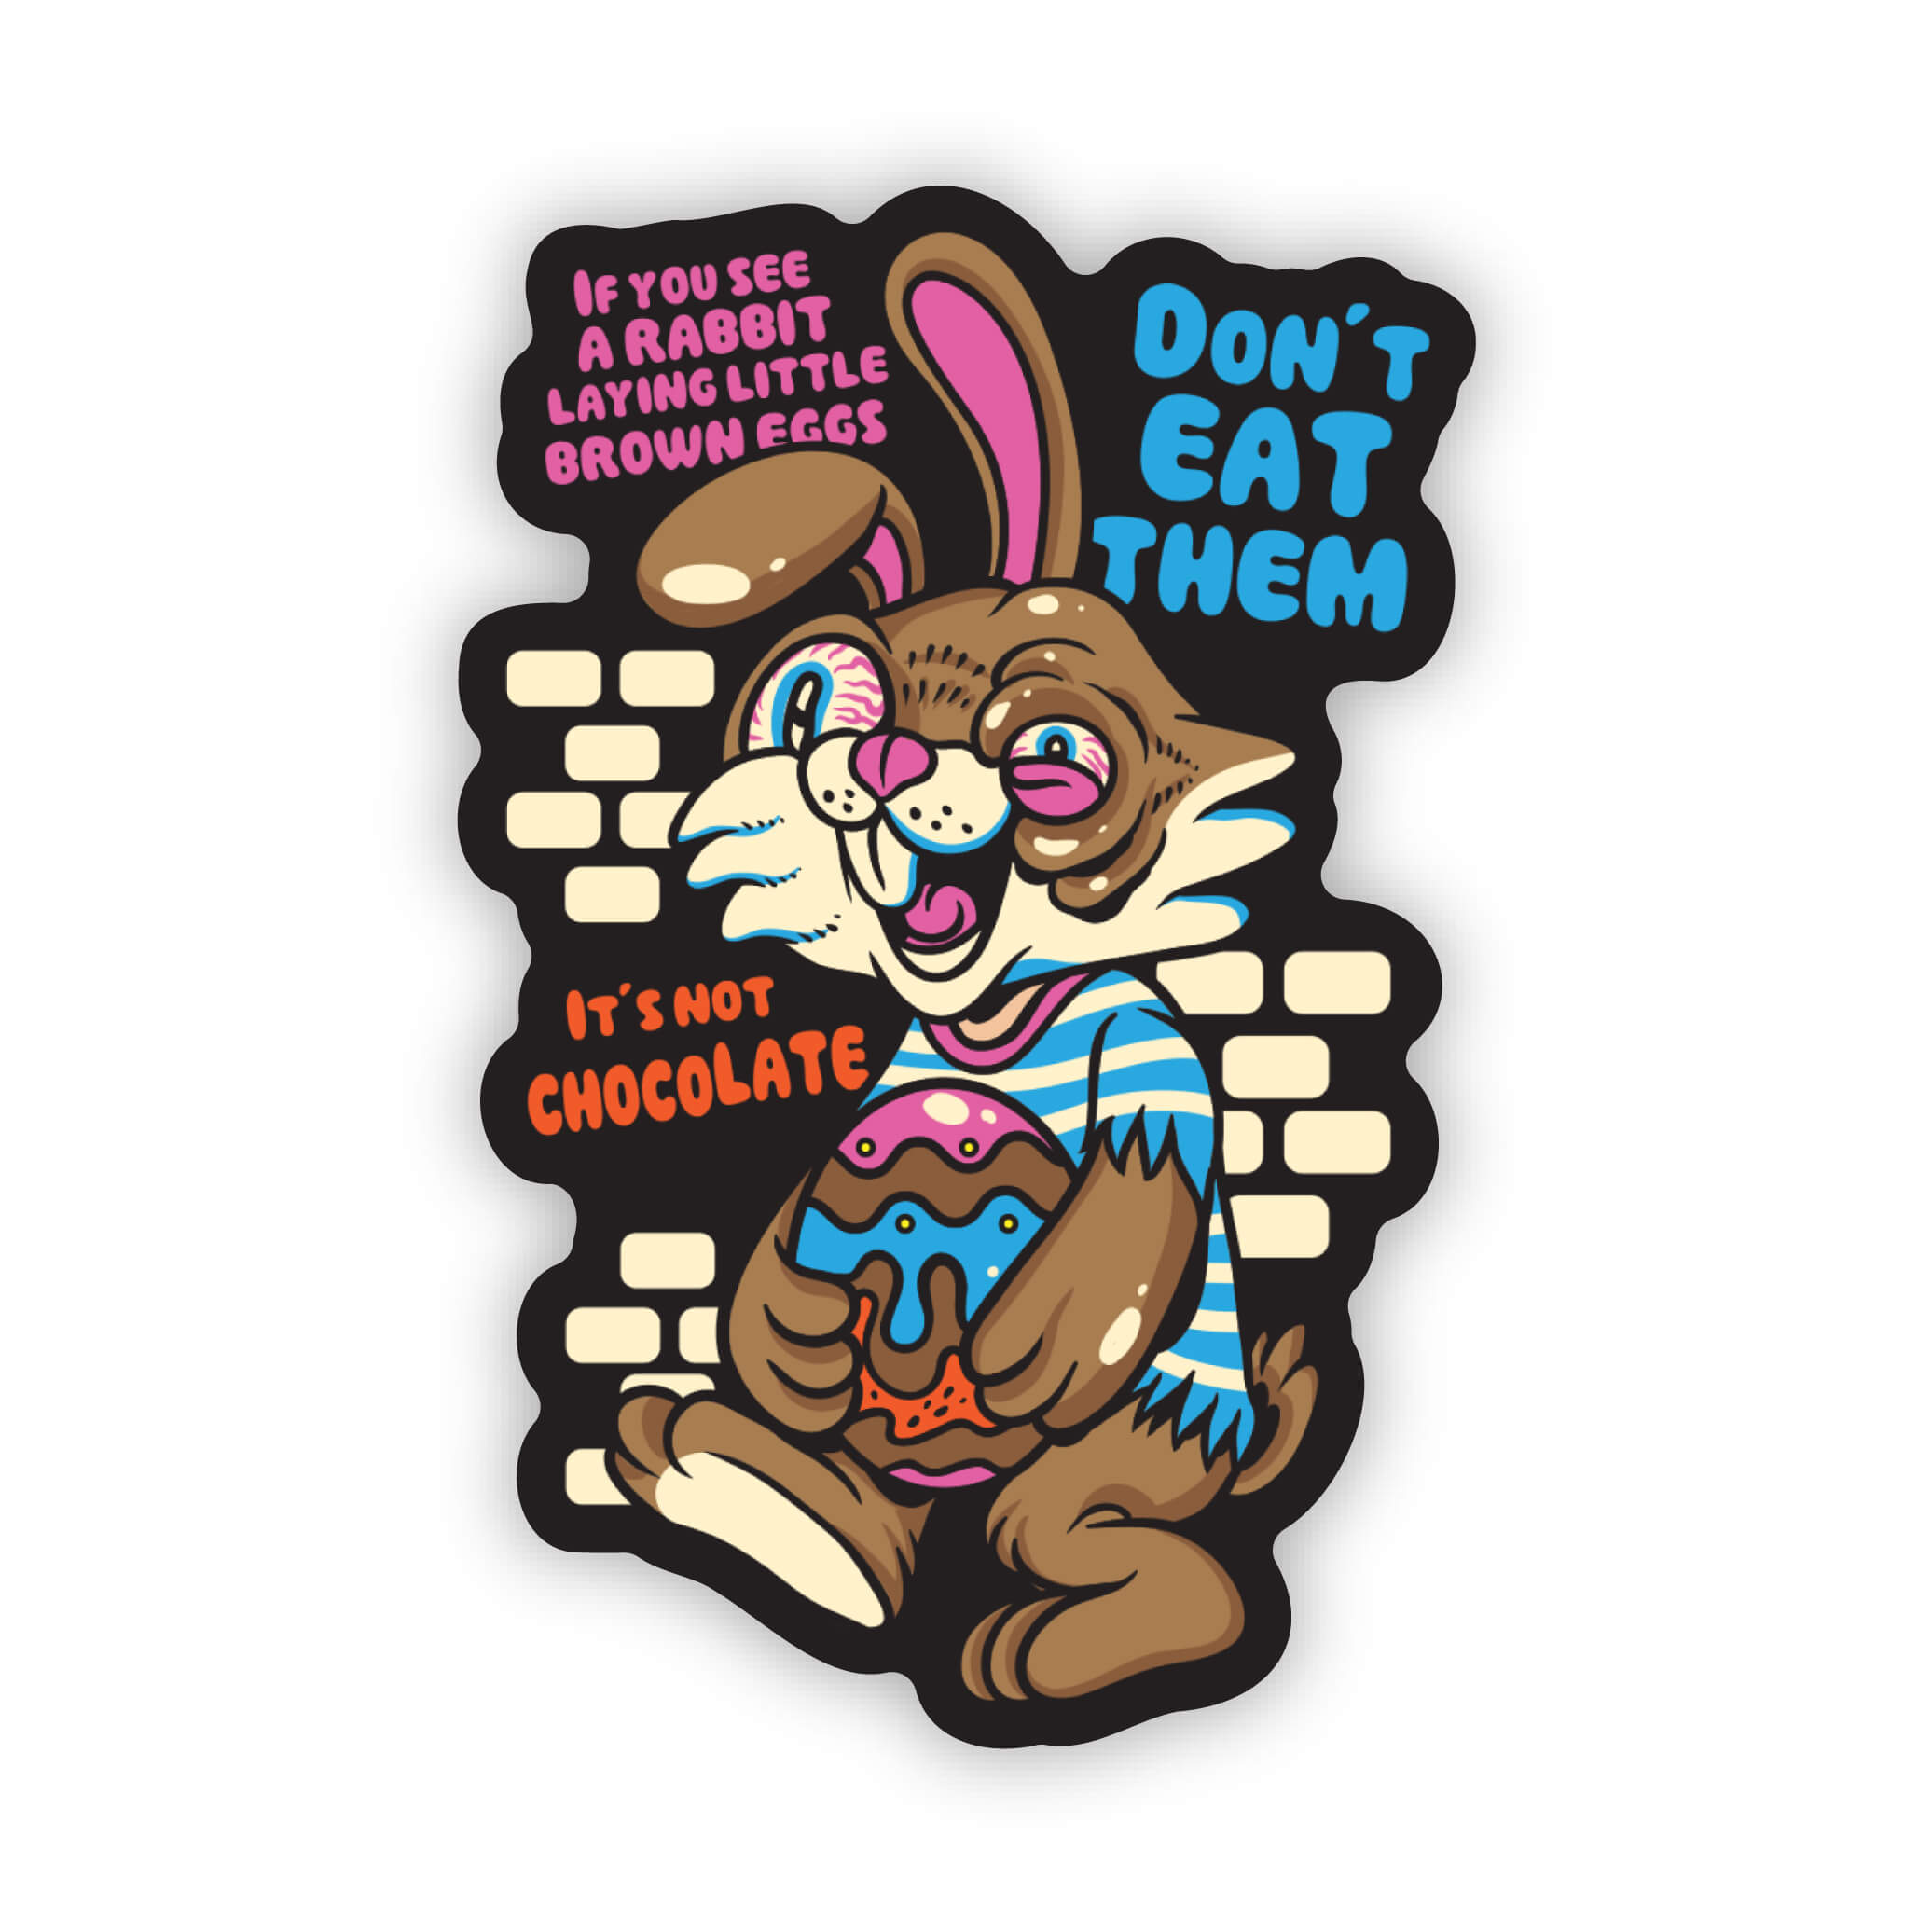 Don't Eat the Brown Eggs Stickers 2.0" x 3.0" Die Cut Sticker